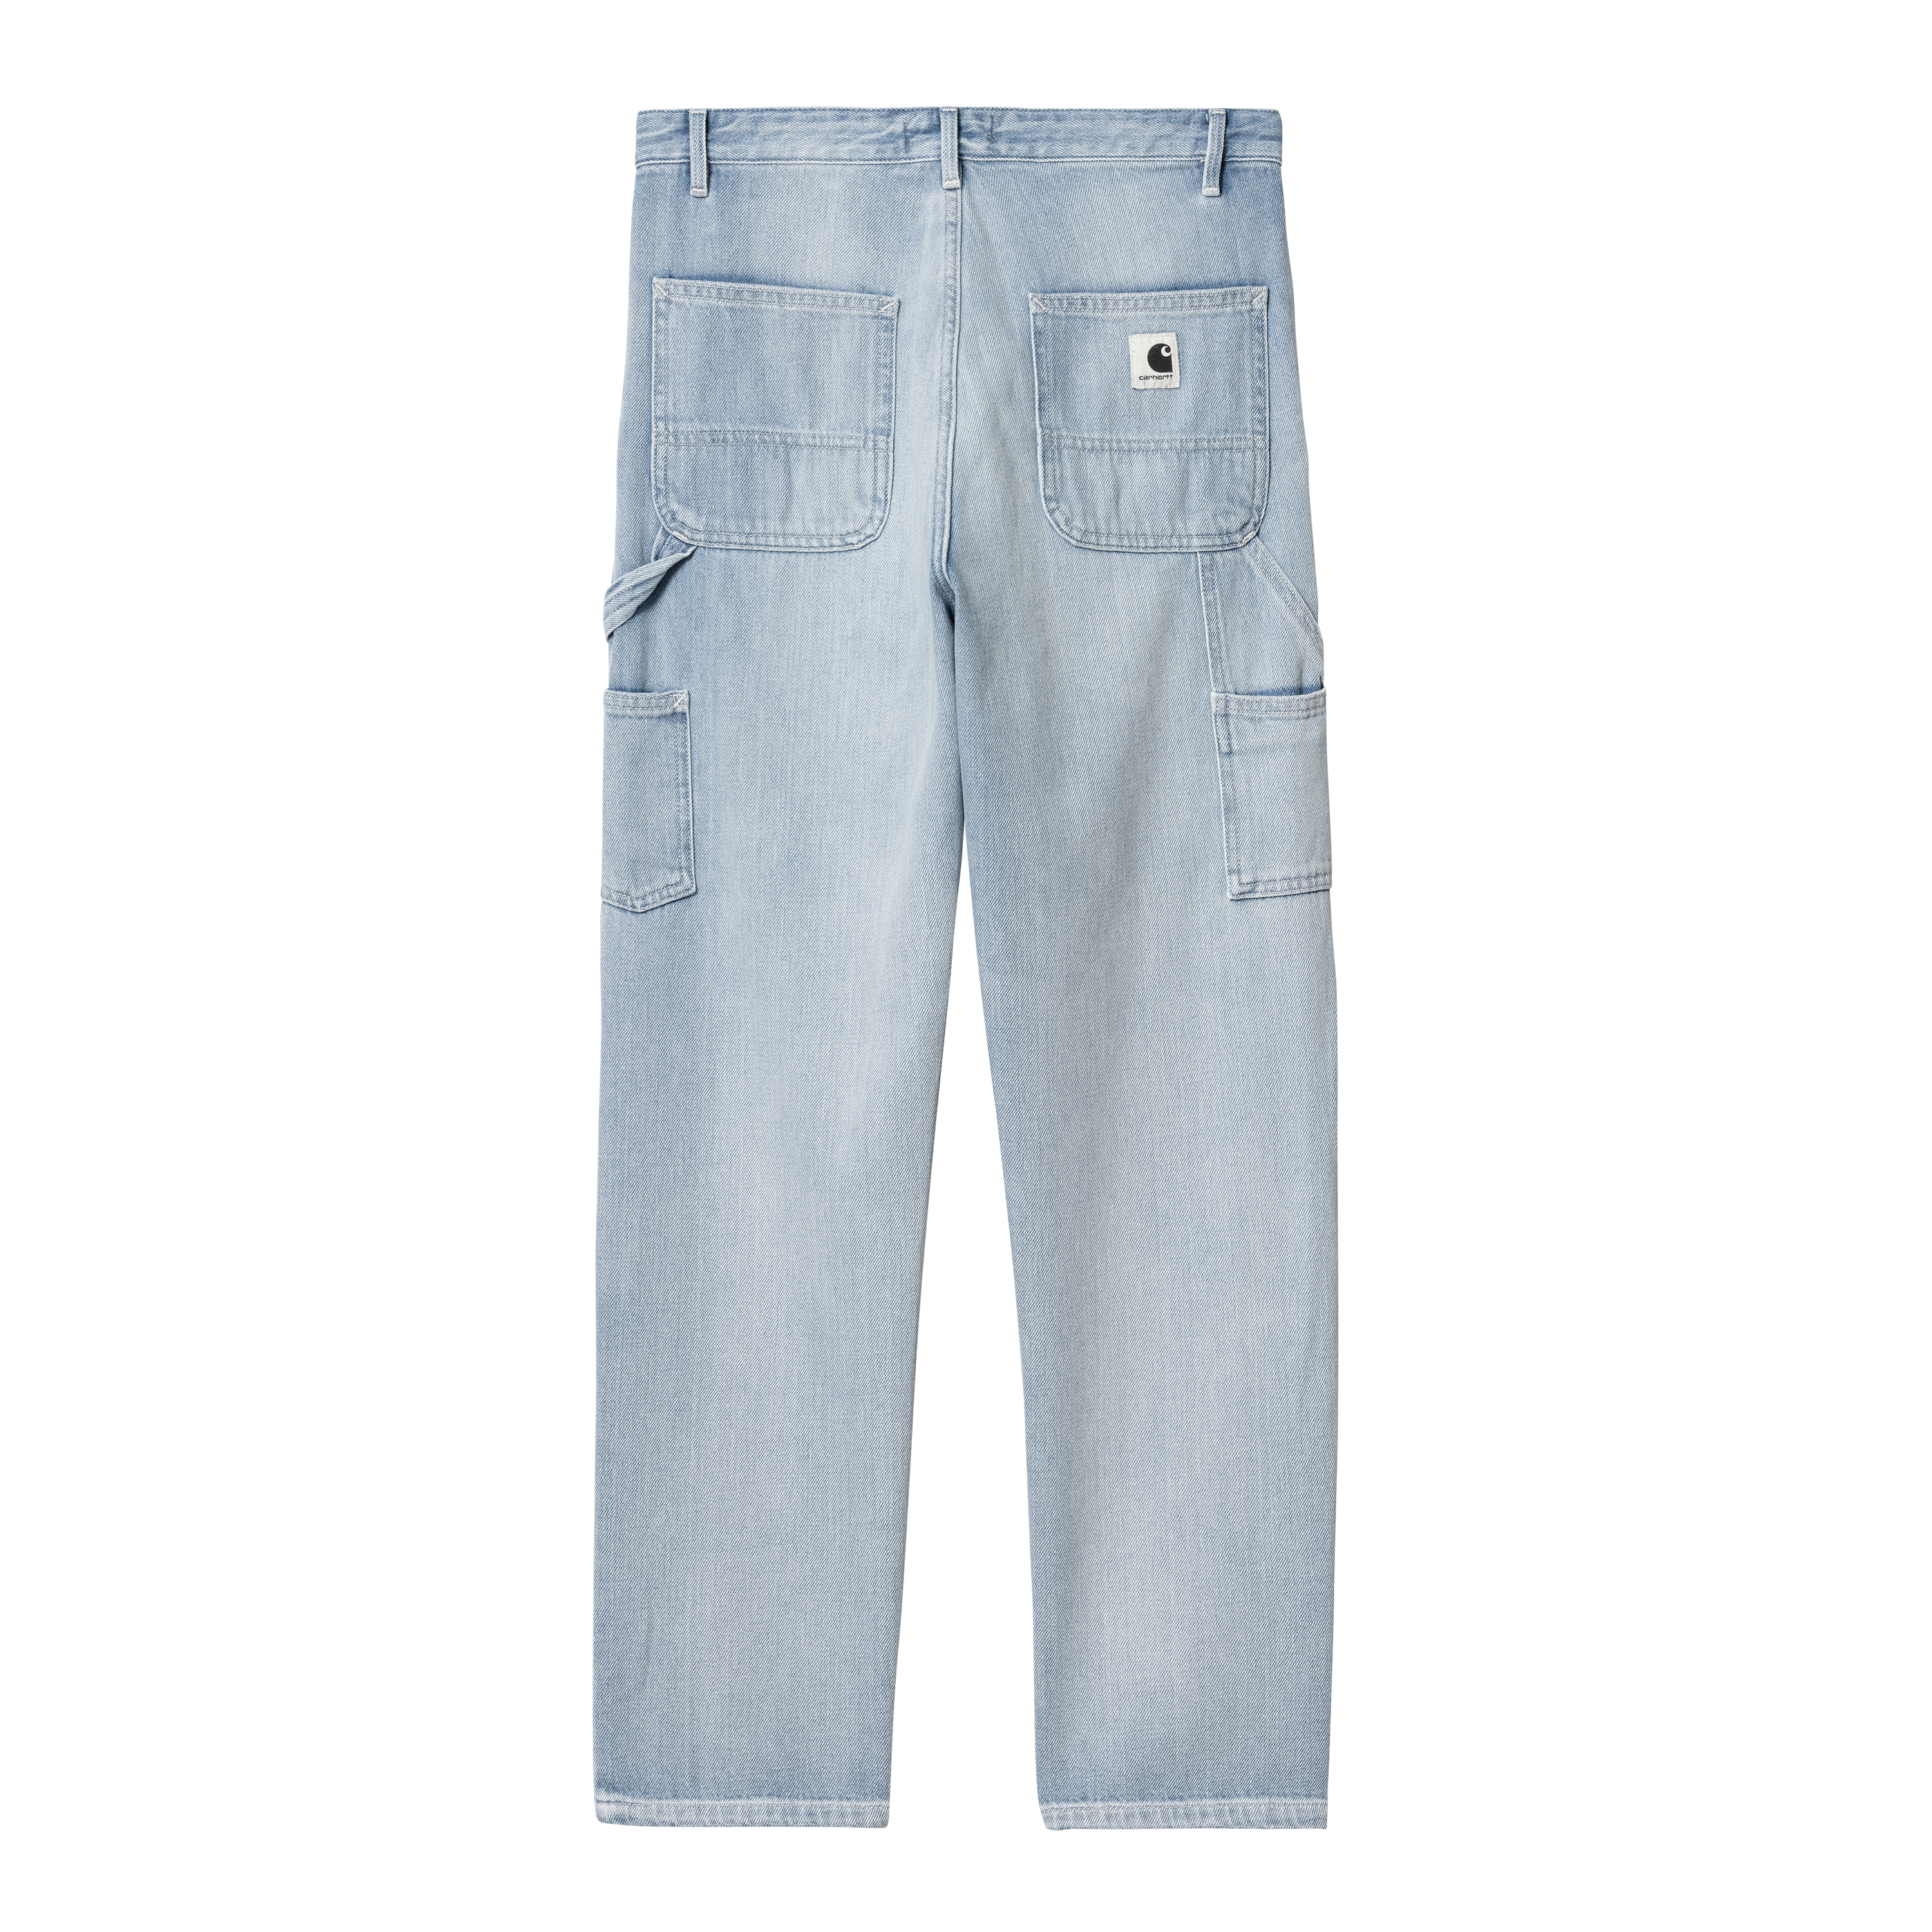 W PIERCE PANT I025268.0147 Jeans BLUE LIGHT STONE WASHED from Carhartt WIP  Women 80 EUR